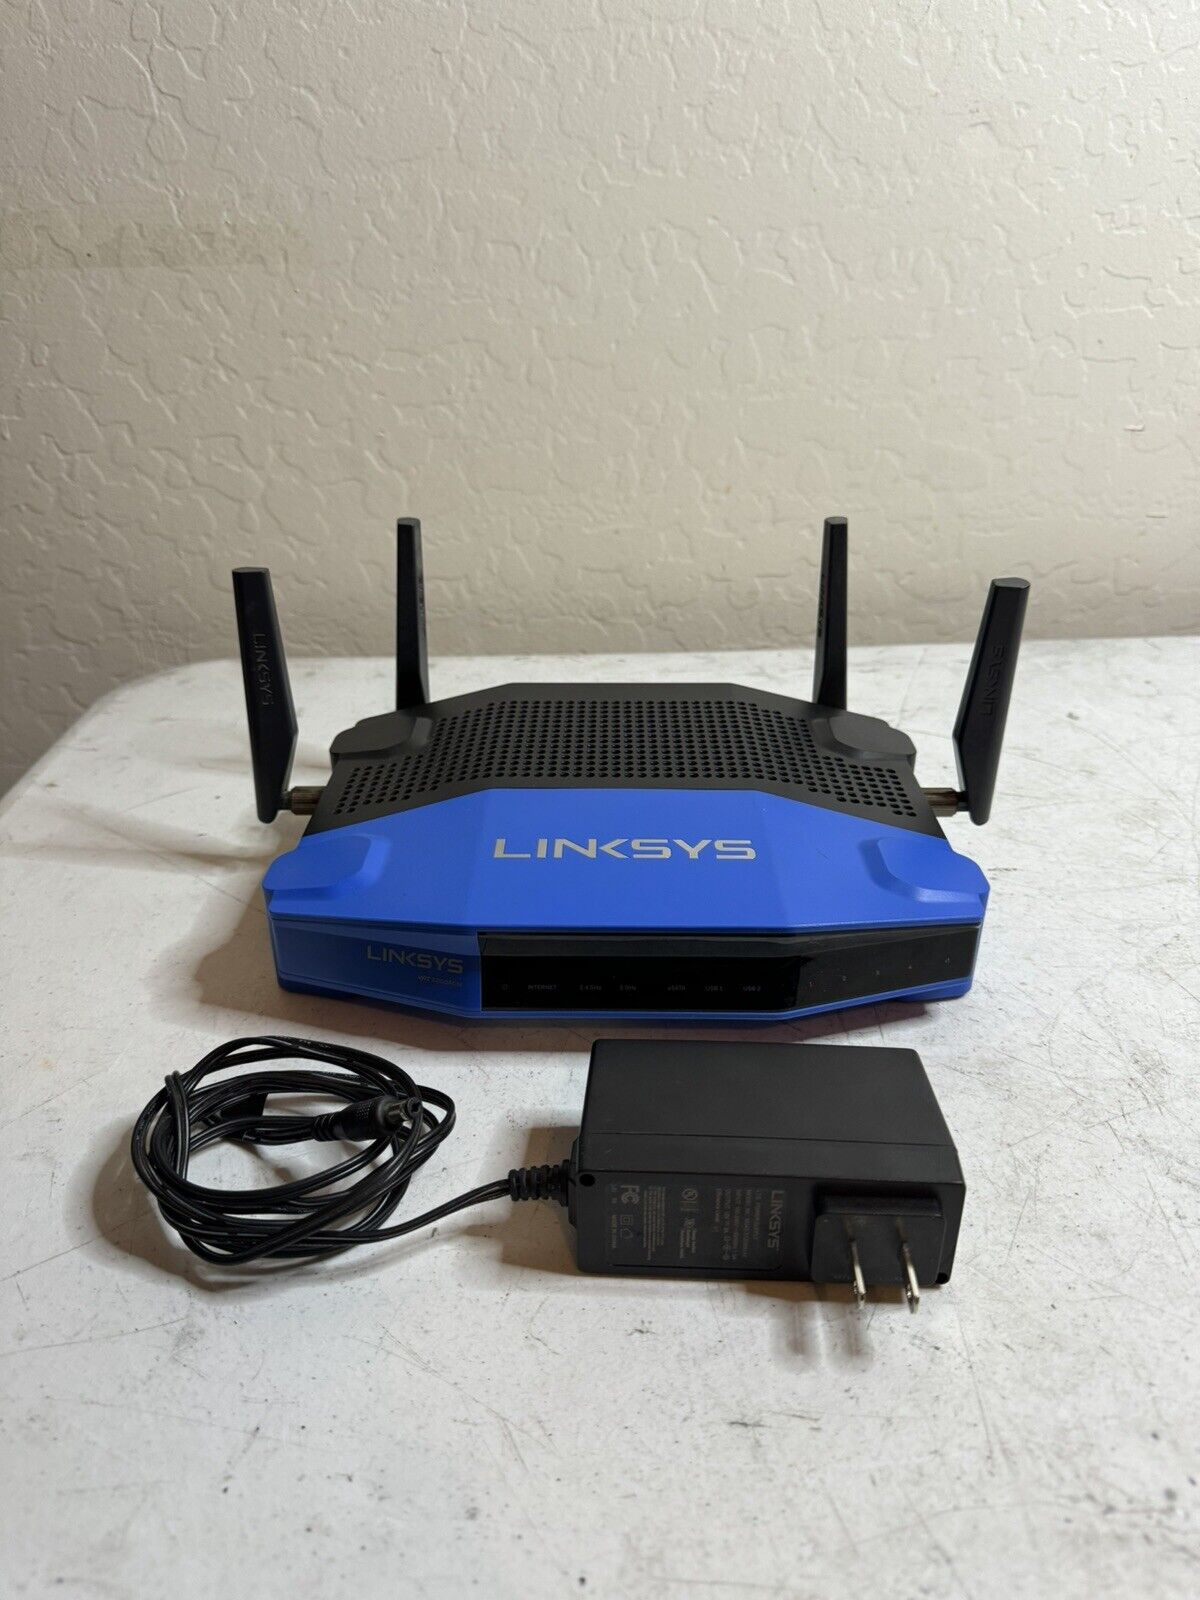 Linksys WRT3200ACM AC3200 Dual-Band Wi-Fi Router Gigabit Wireless Router